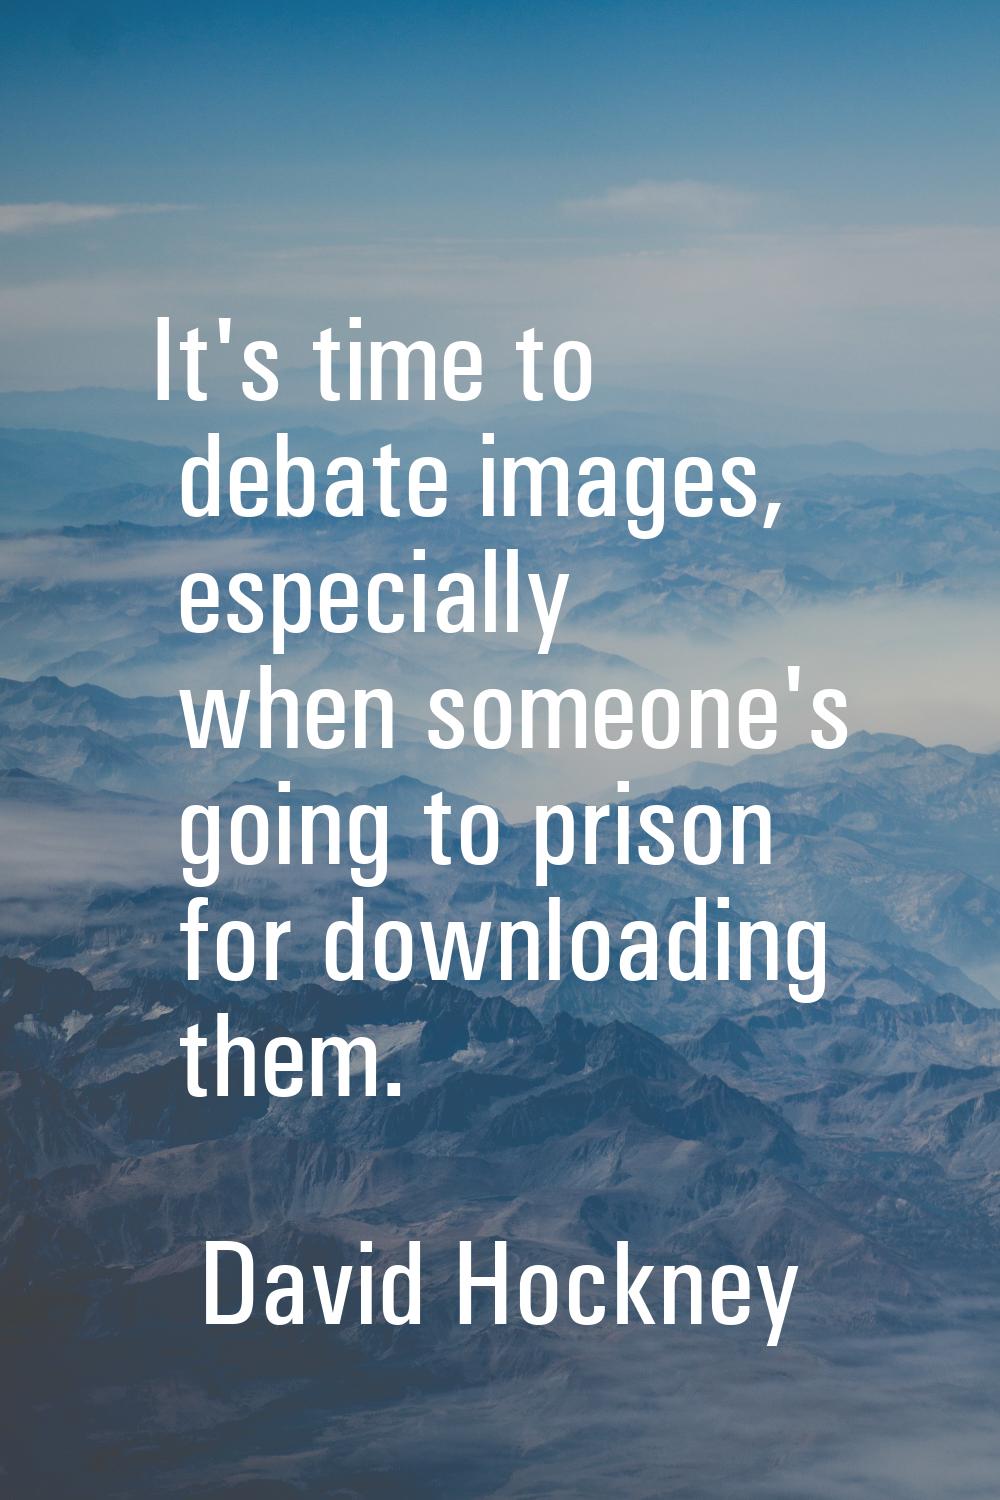 It's time to debate images, especially when someone's going to prison for downloading them.